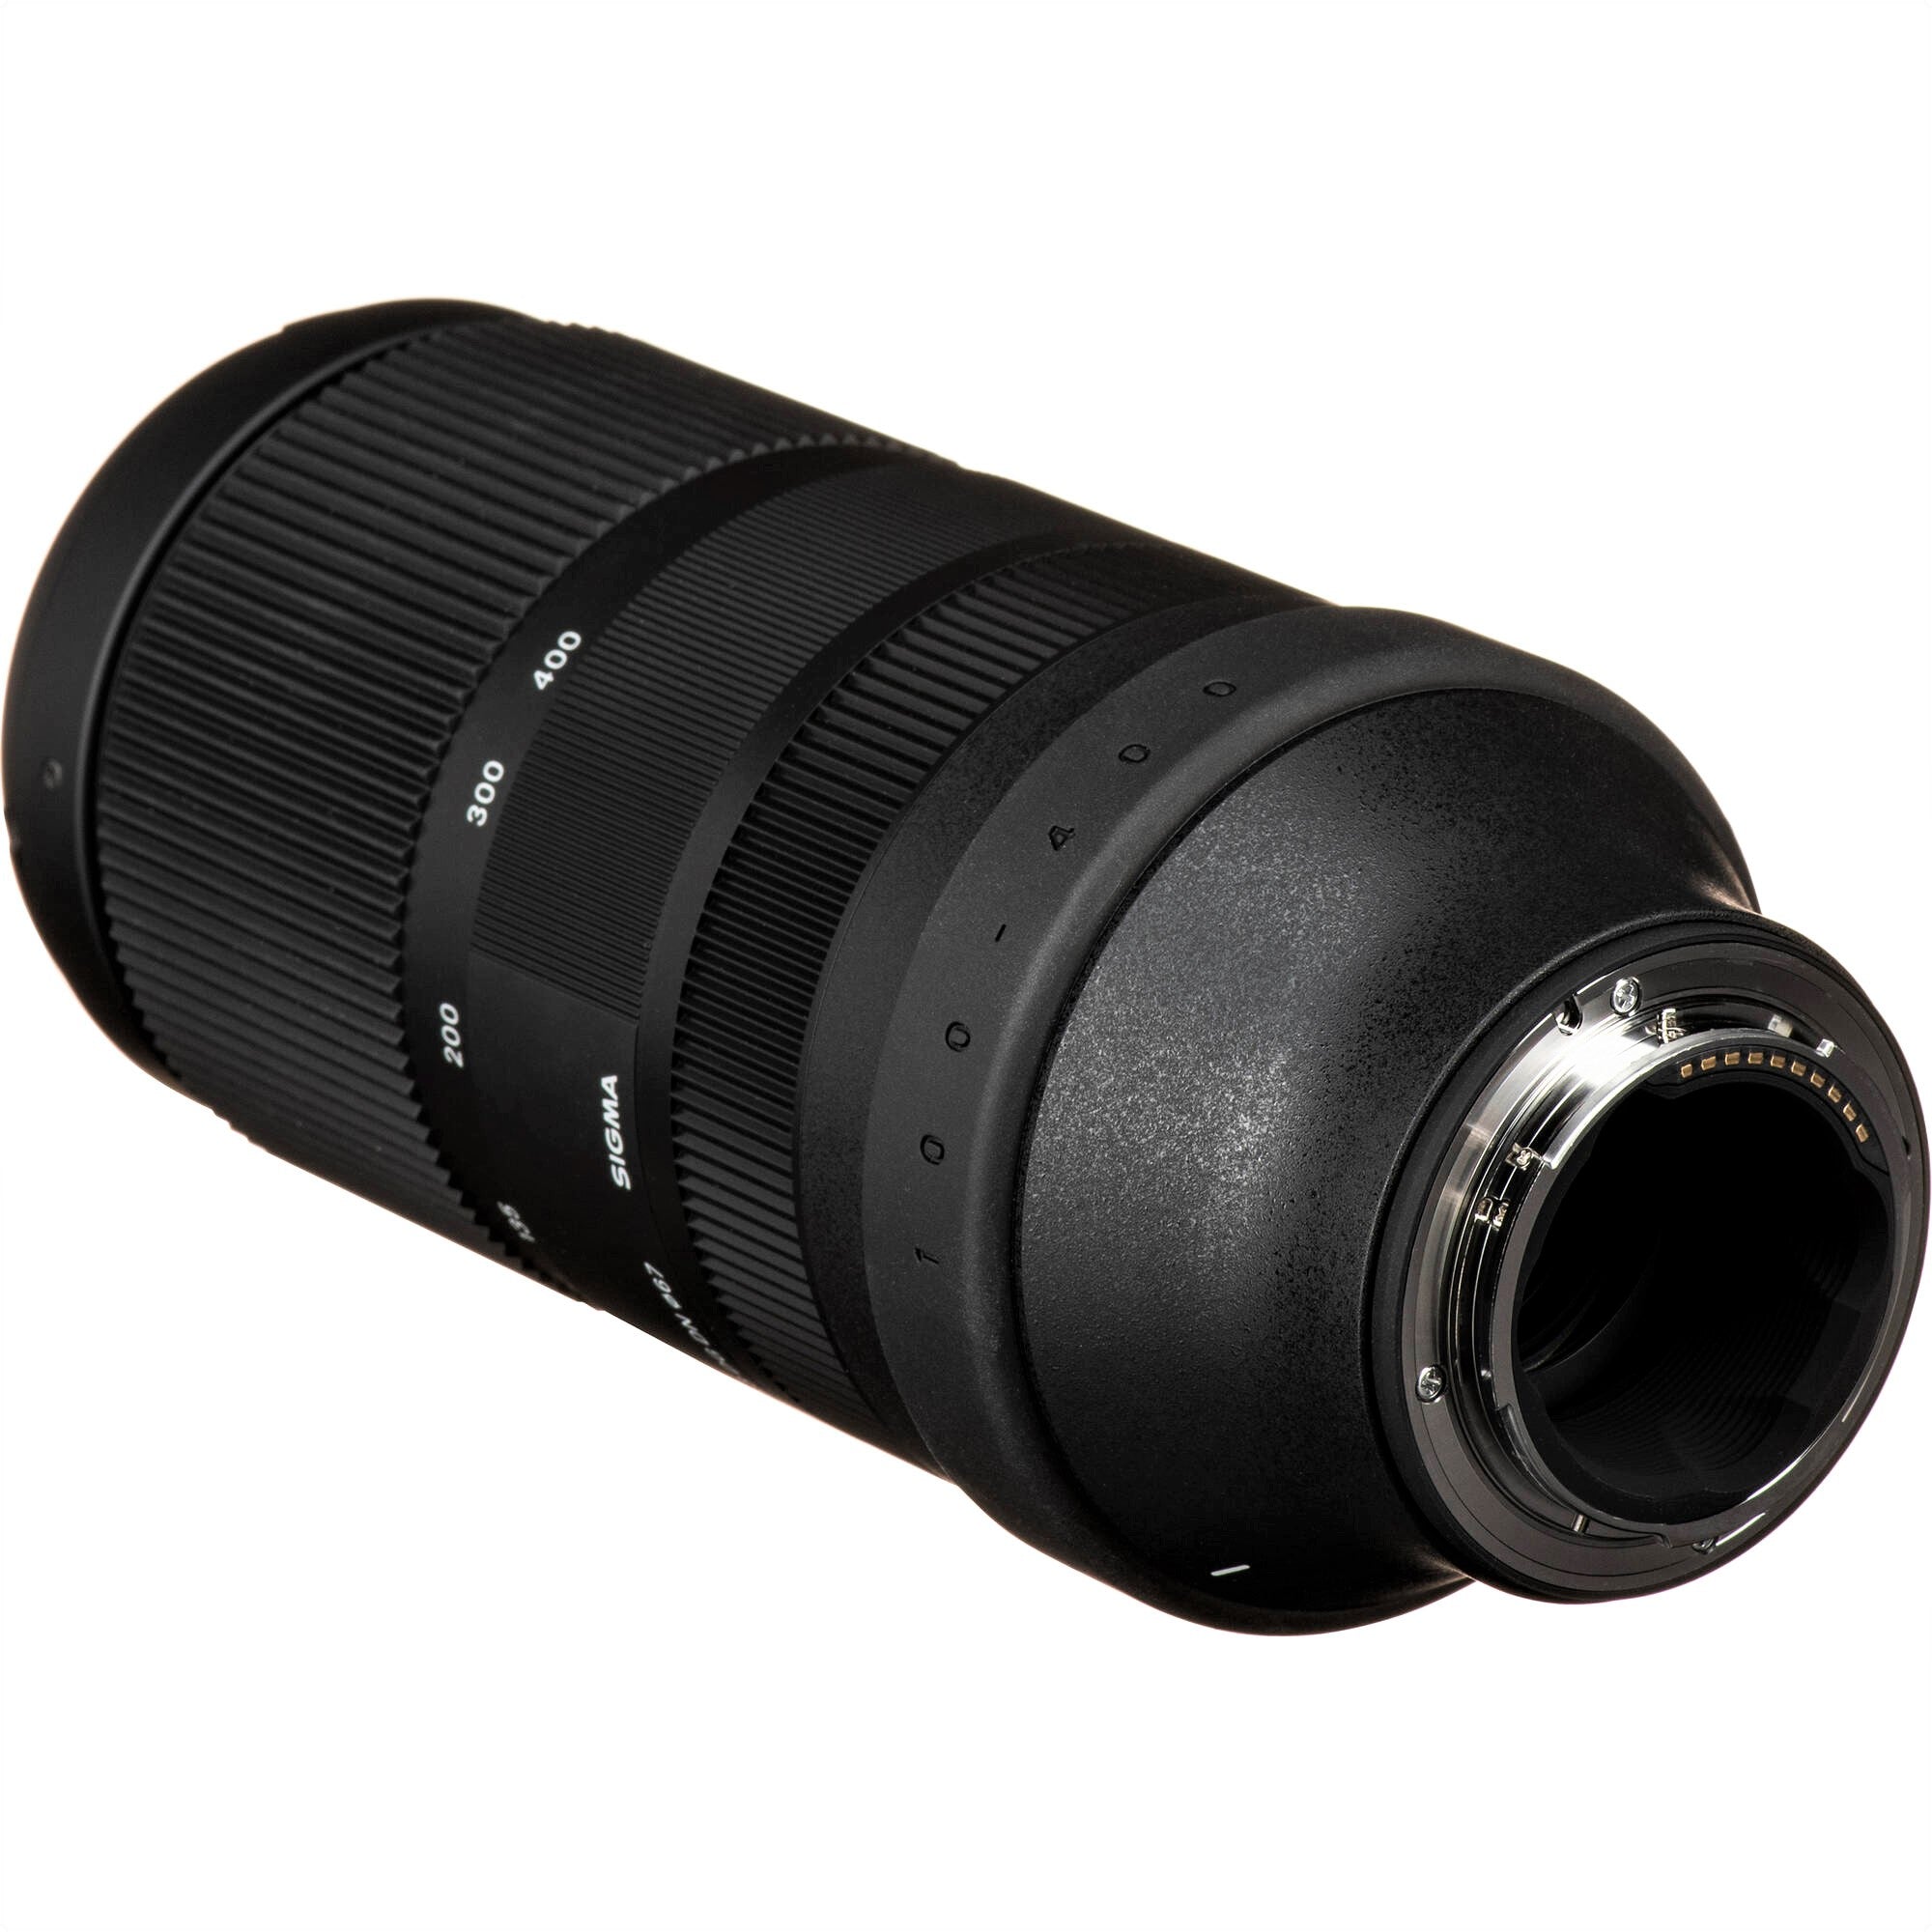 Sigma 100-400mm f/5-6.3 DG DN OS Contemporary Lens for Sony E - Back Side View